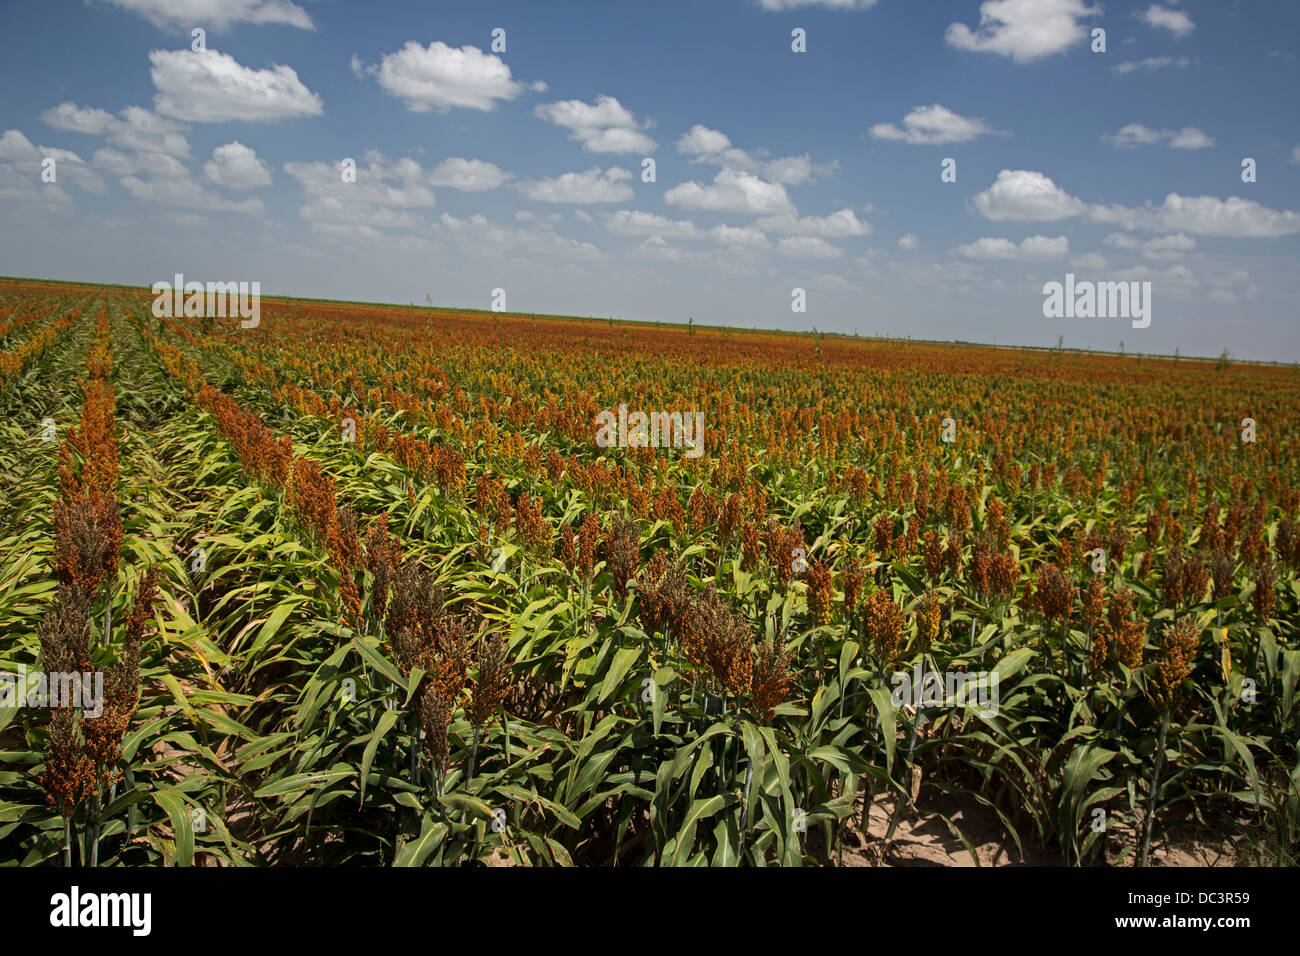 Monte Alto, Texas - A field of sorghum, stressed by drought, in the Rio Grande Valley. Stock Photo